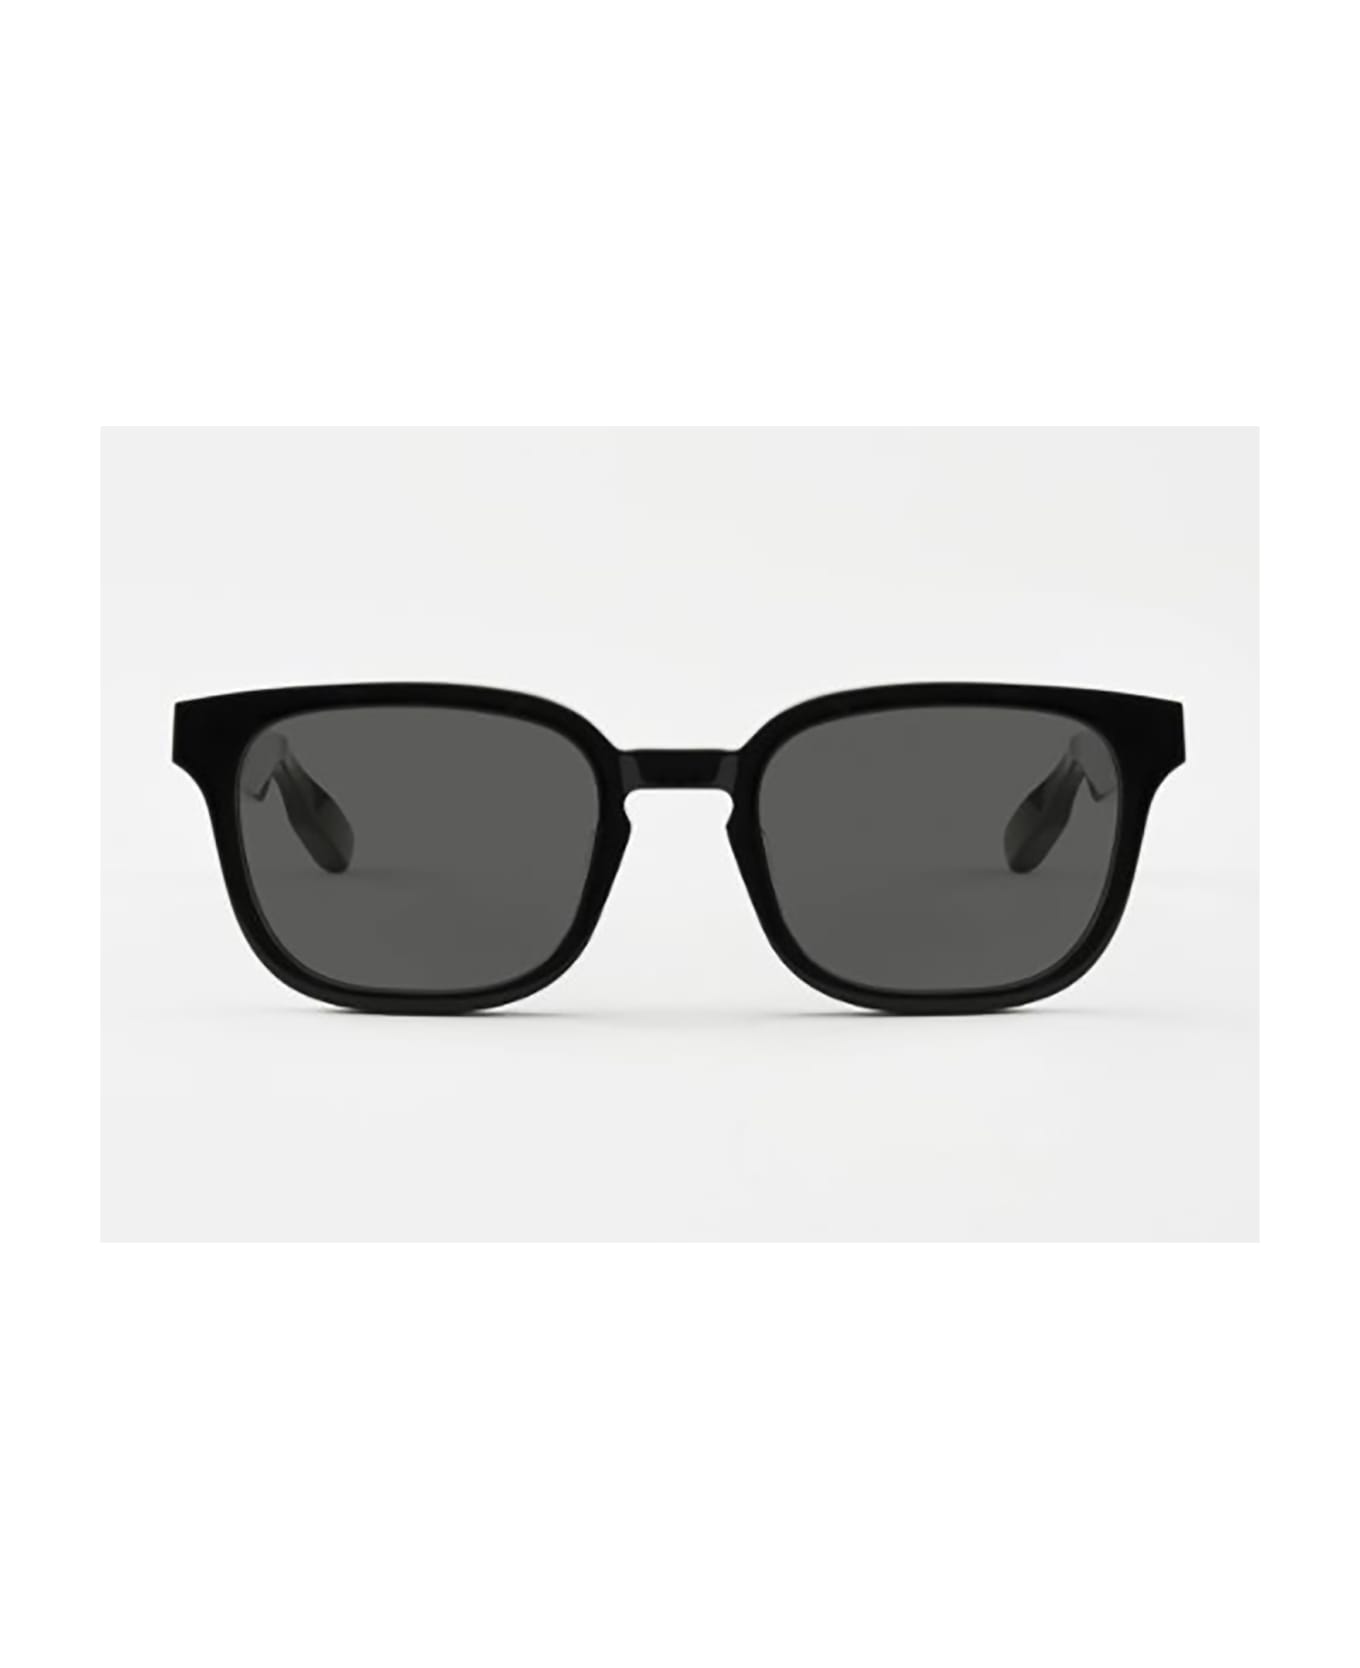 Aether S1/S Sunglasses - Black